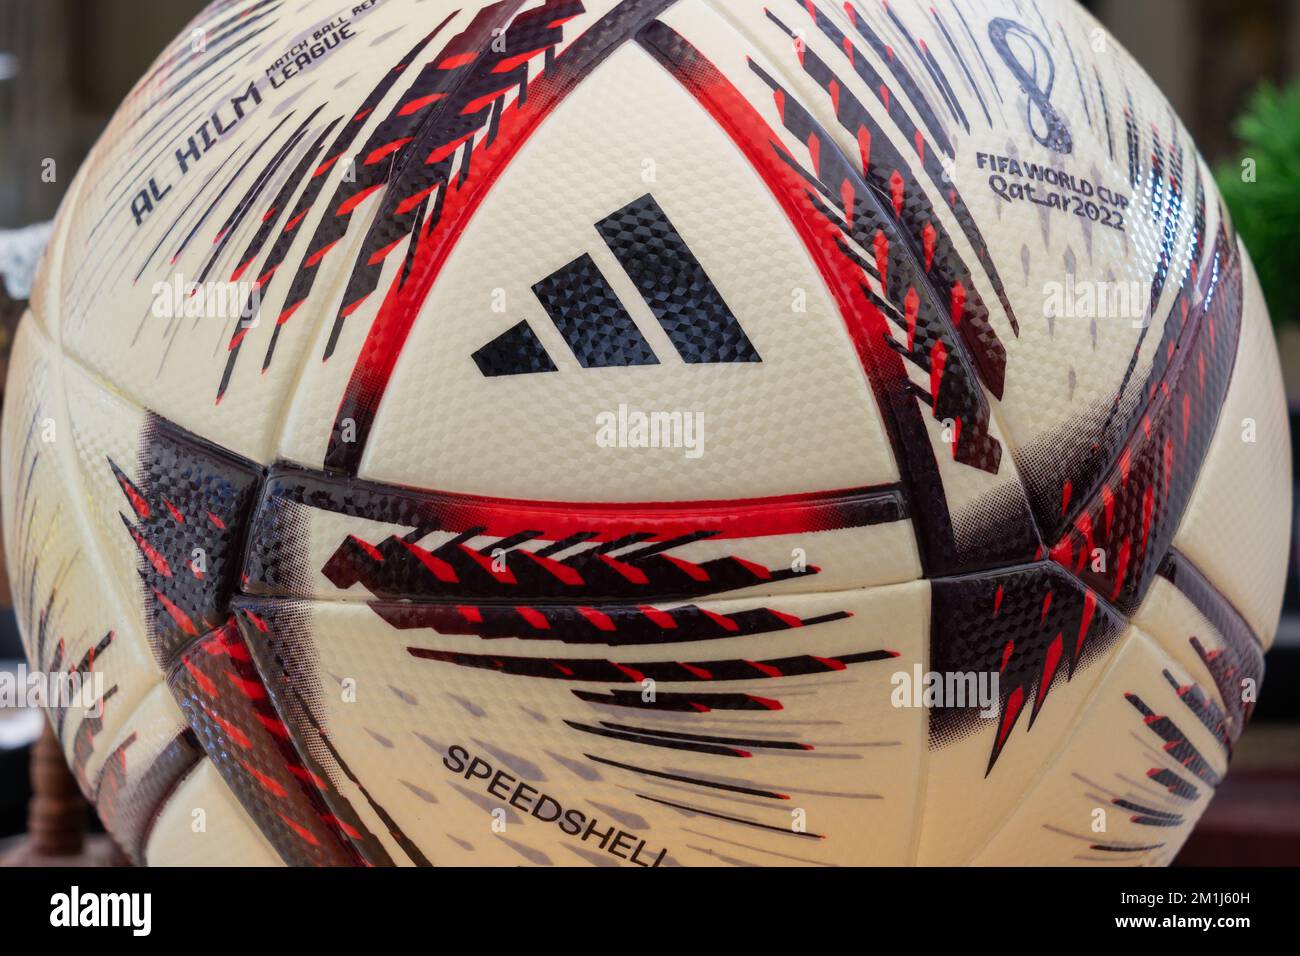 Close up of the adidas Al Hilm ball which is the official match ball used in the FIFA World Cup 2022 Qatar semi-finals and final. Stock Photo